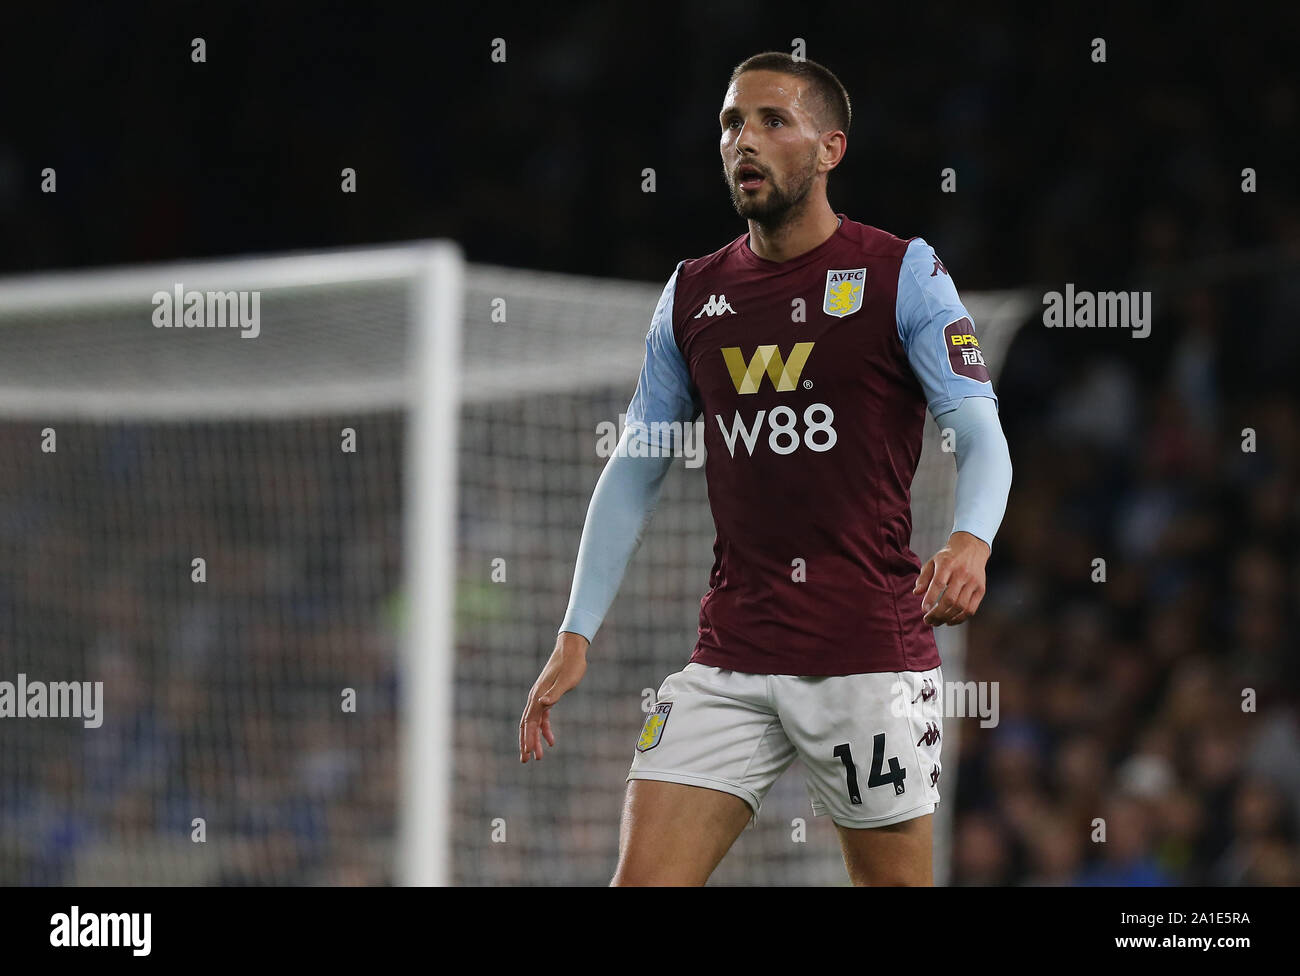 Brighton, UK. 25 September 2019 Villa's Conor Hourihane during the Carabao Cup third round match  between Brighton & Hove Albion and Aston Villa at the American Express Community Stadium in Brighton. Credit: James Boardman/TPI/ Alamy Live News Stock Photo